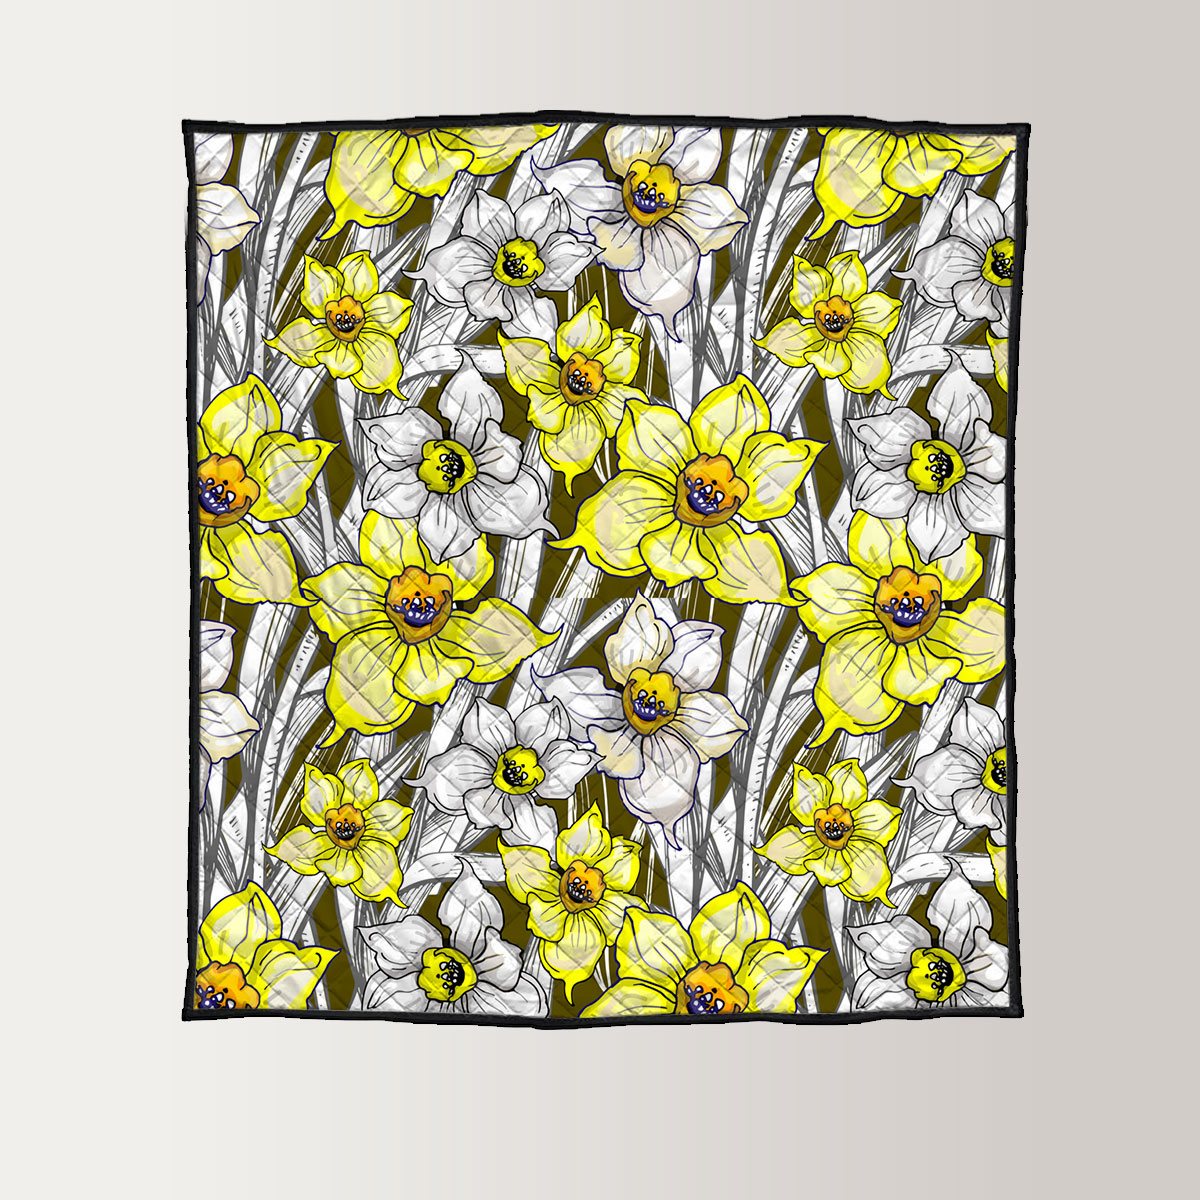 Botanical With Flowers Of Narcissus Daffodil Quilt